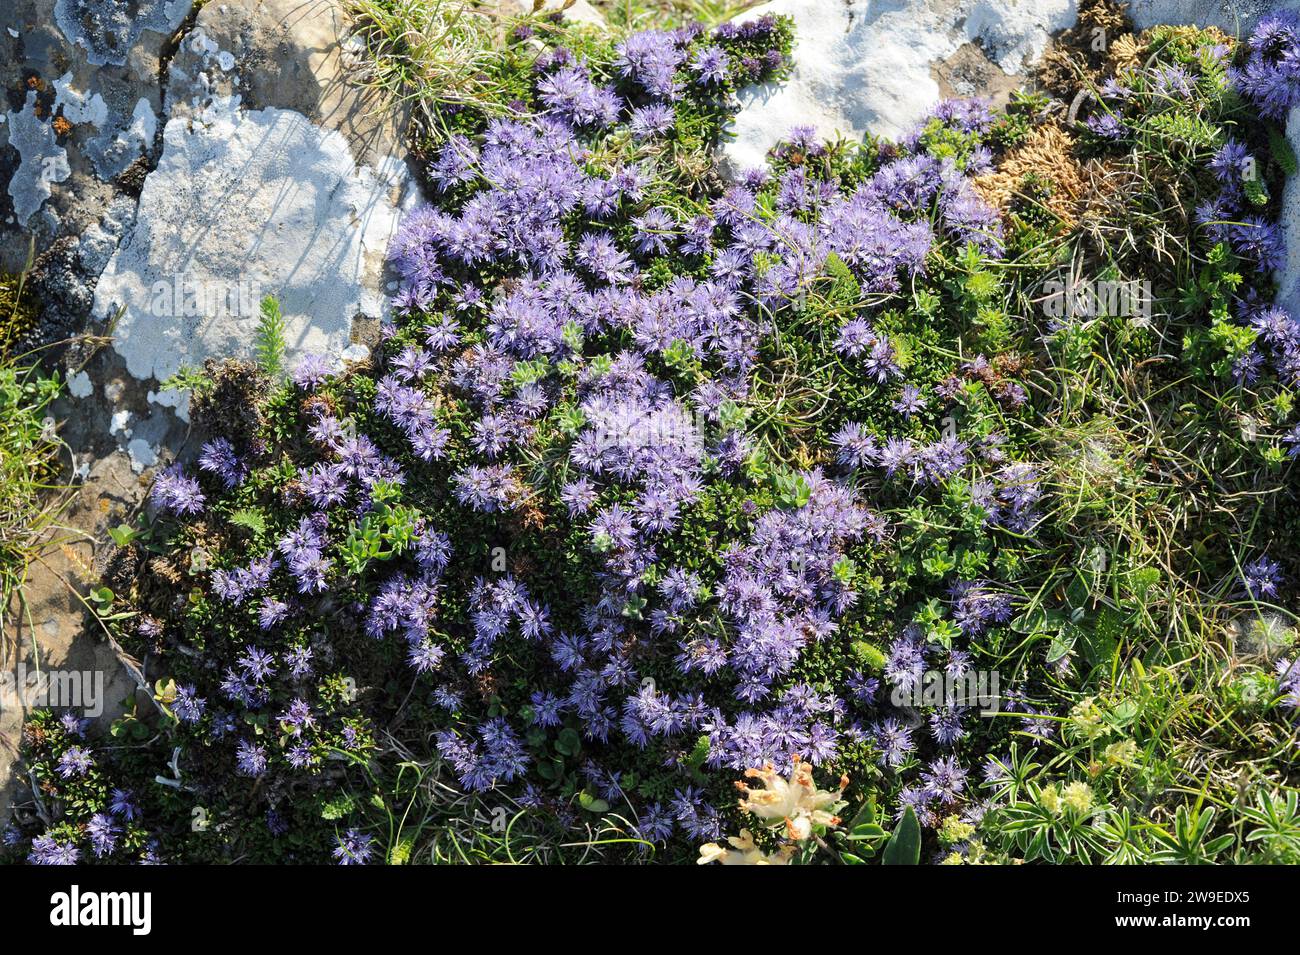 Siemprejunta (Globularia repens) is a subshrub native to Alps, Pyrenees and Cantabrian Mountains. This photo was taken in Larra-Belagua Natural Park, Stock Photo